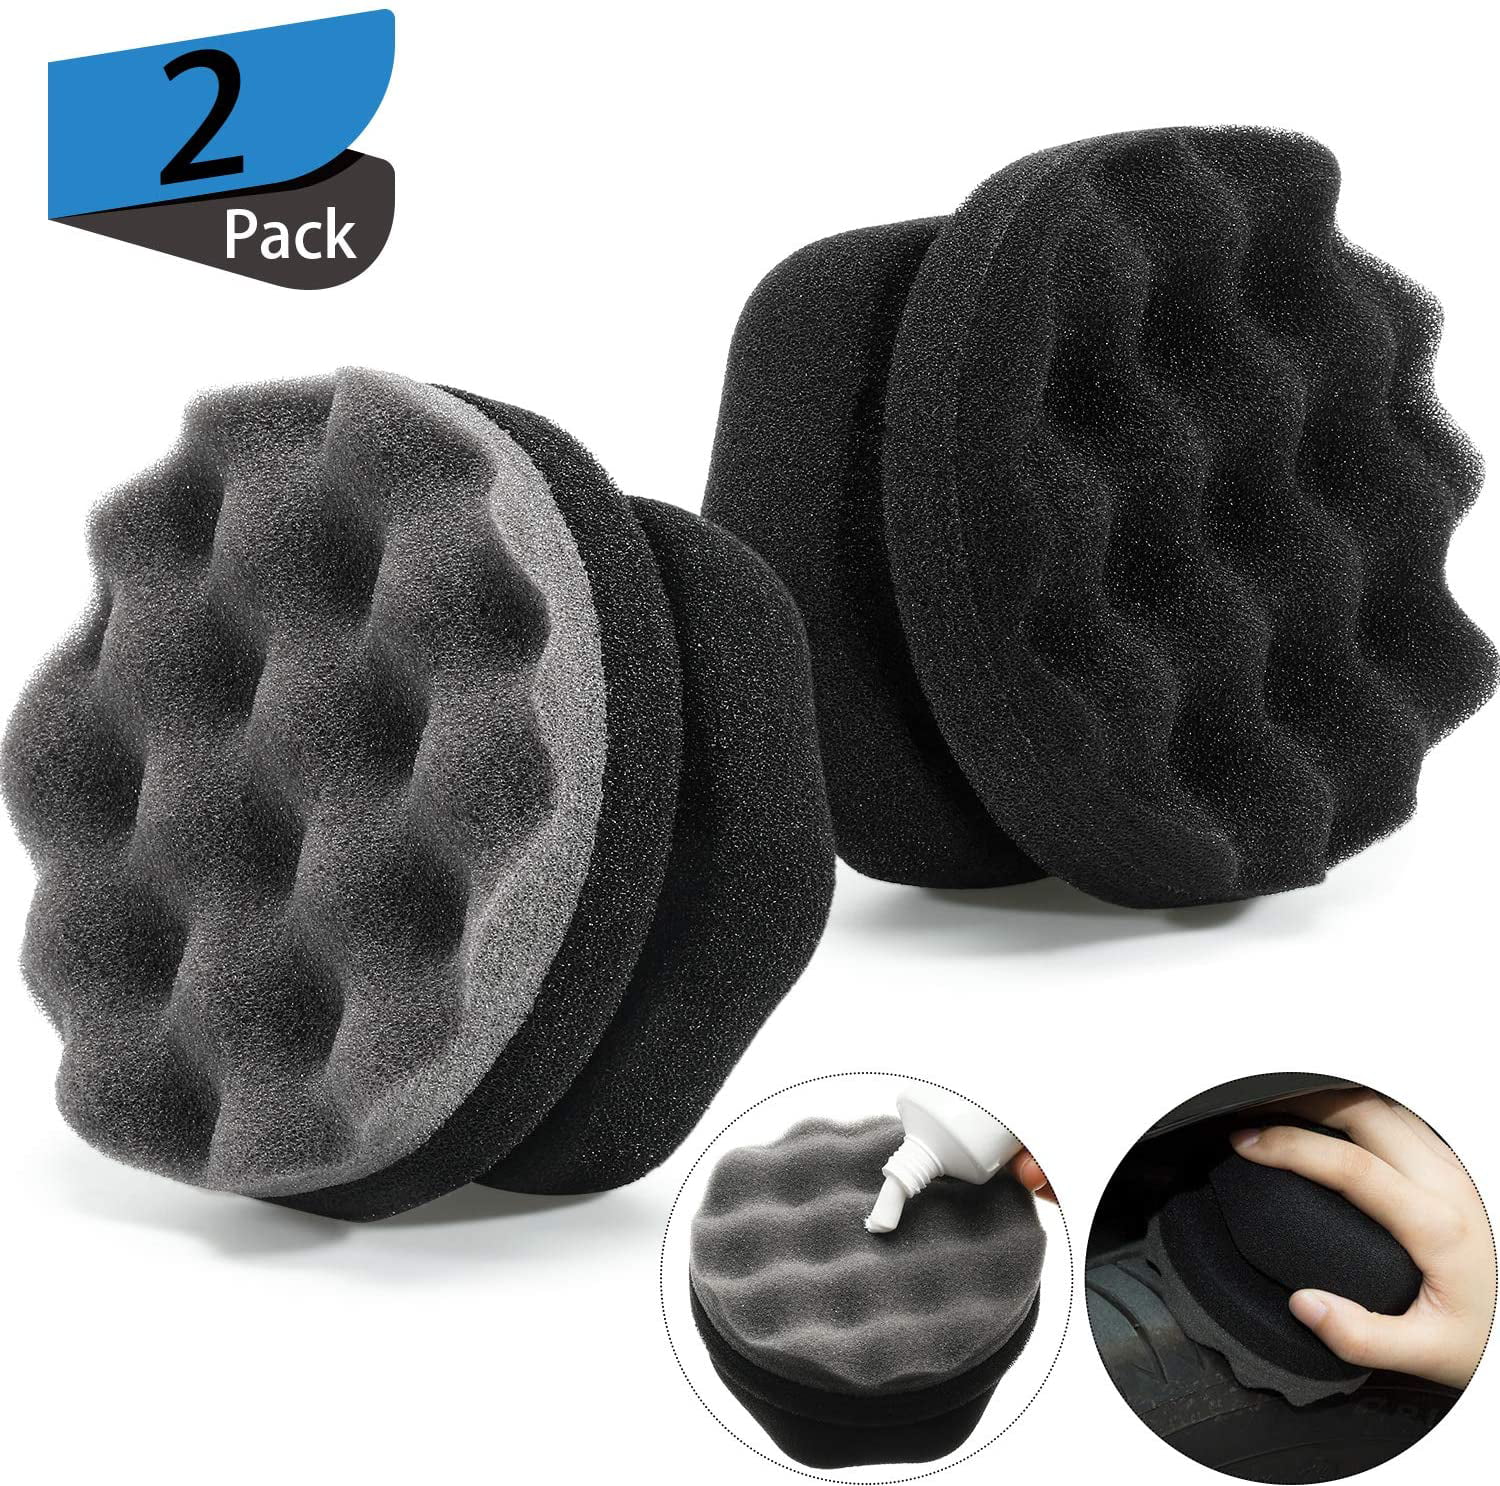 Black 2 Pieces Tire Dressing Applicator Tire Shine Applicator Dressing Pad Tire Cleaner Sponge Large Hex Grip Design for Applying Tire Shine Dressing Vinyl Rubber and Trim Accessories 